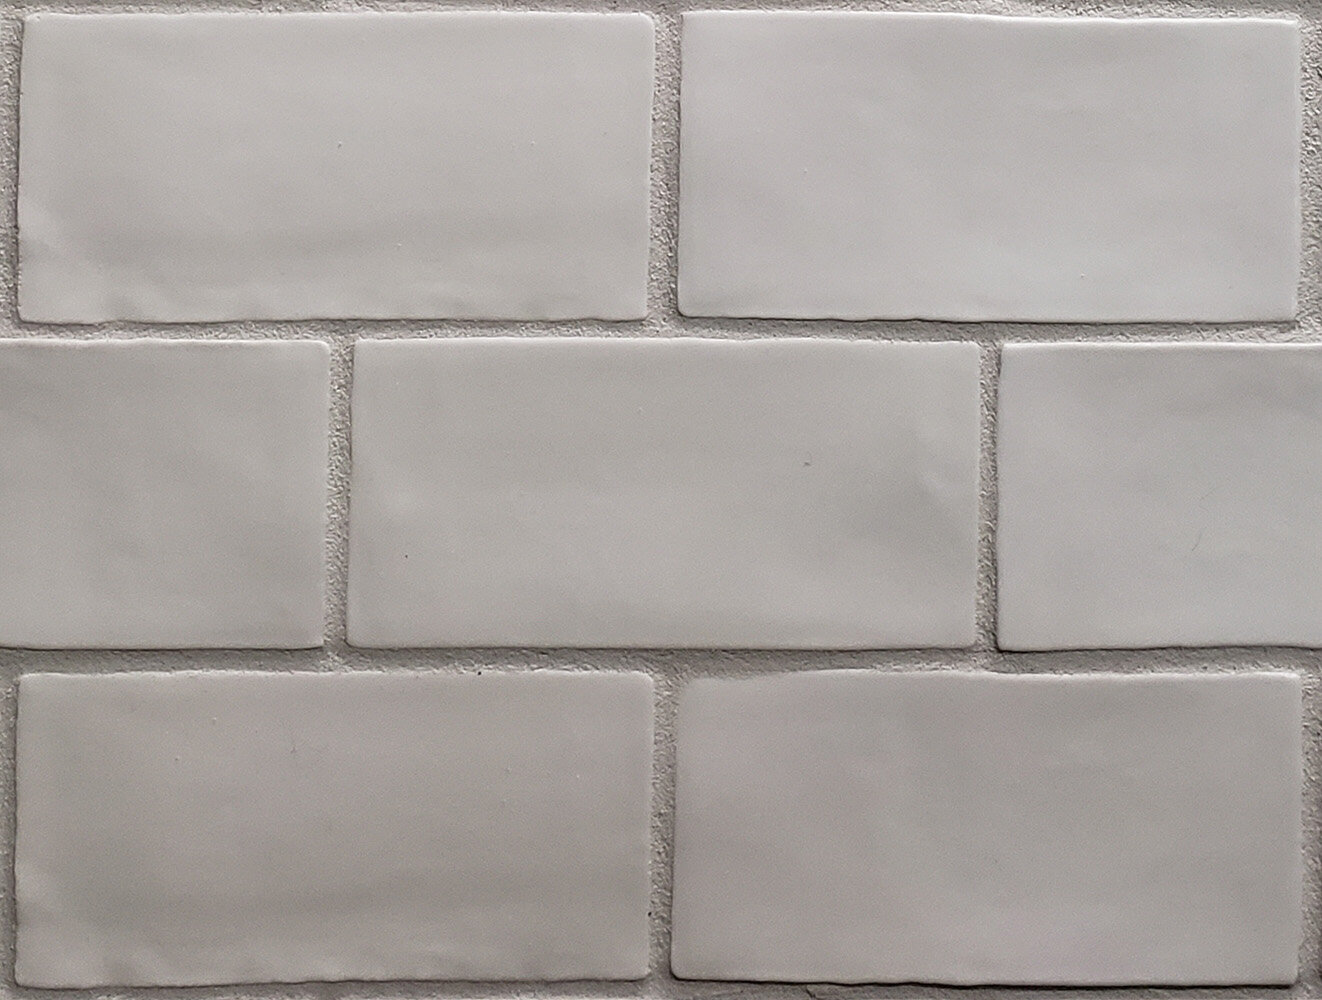 Grout Size For Your Tile, How Far Should Subway Tile Be Spaced